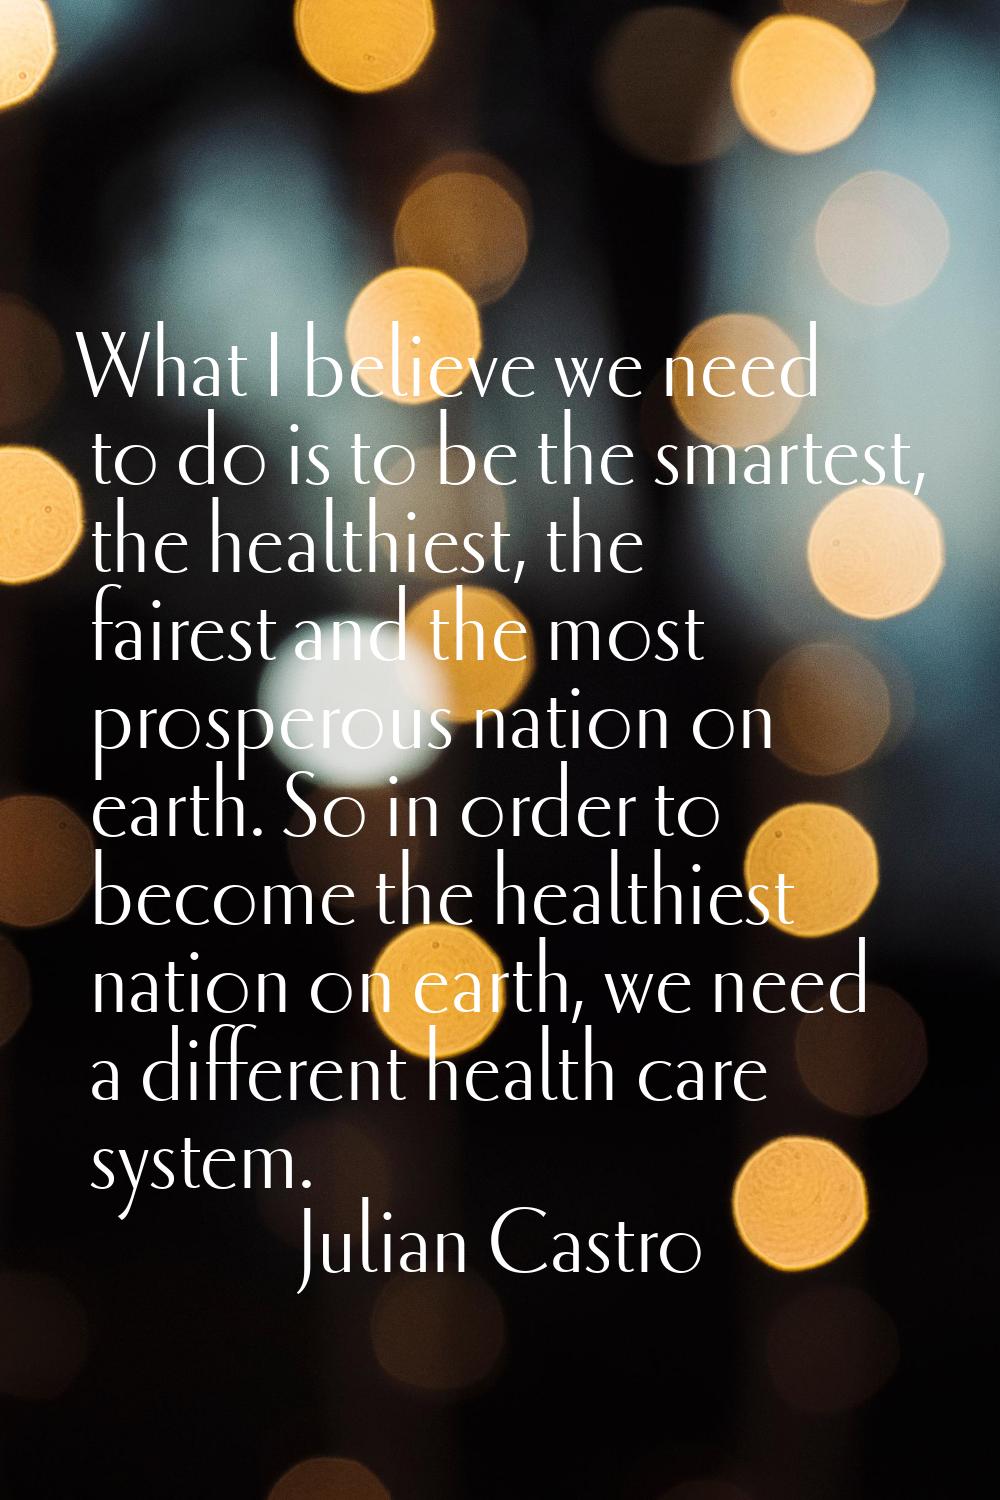 What I believe we need to do is to be the smartest, the healthiest, the fairest and the most prospe